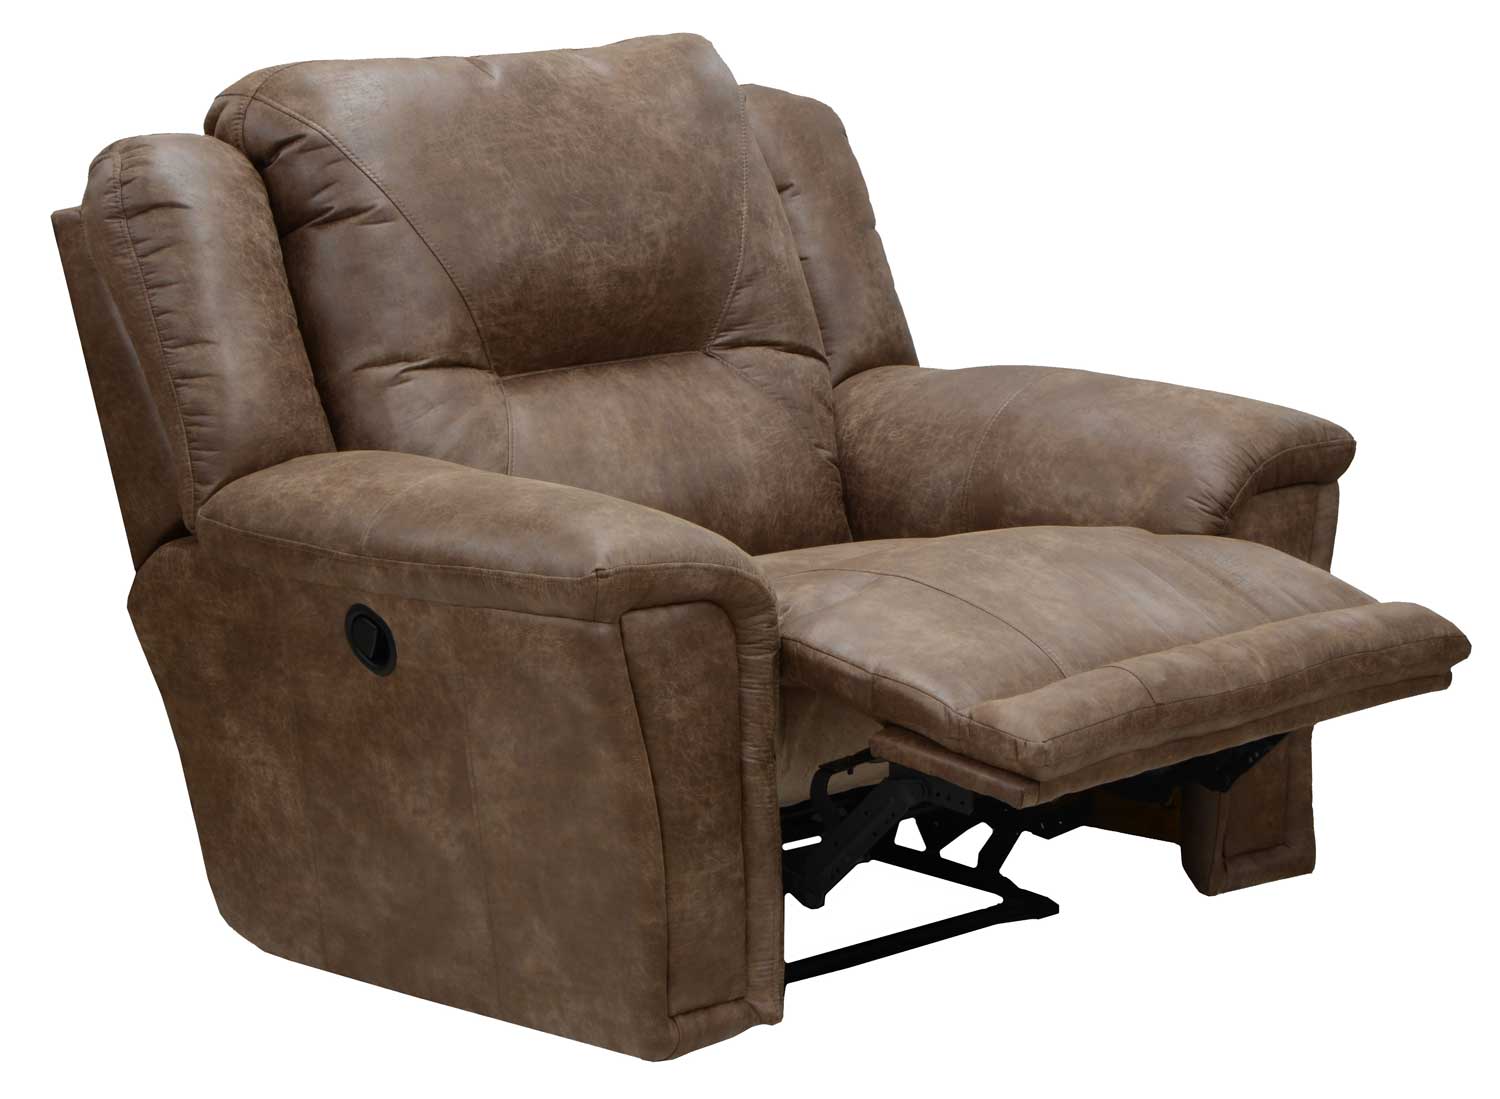 CatNapper Collin Power Lay Flat Recliner with X-tra Comfort Footrest - Silt